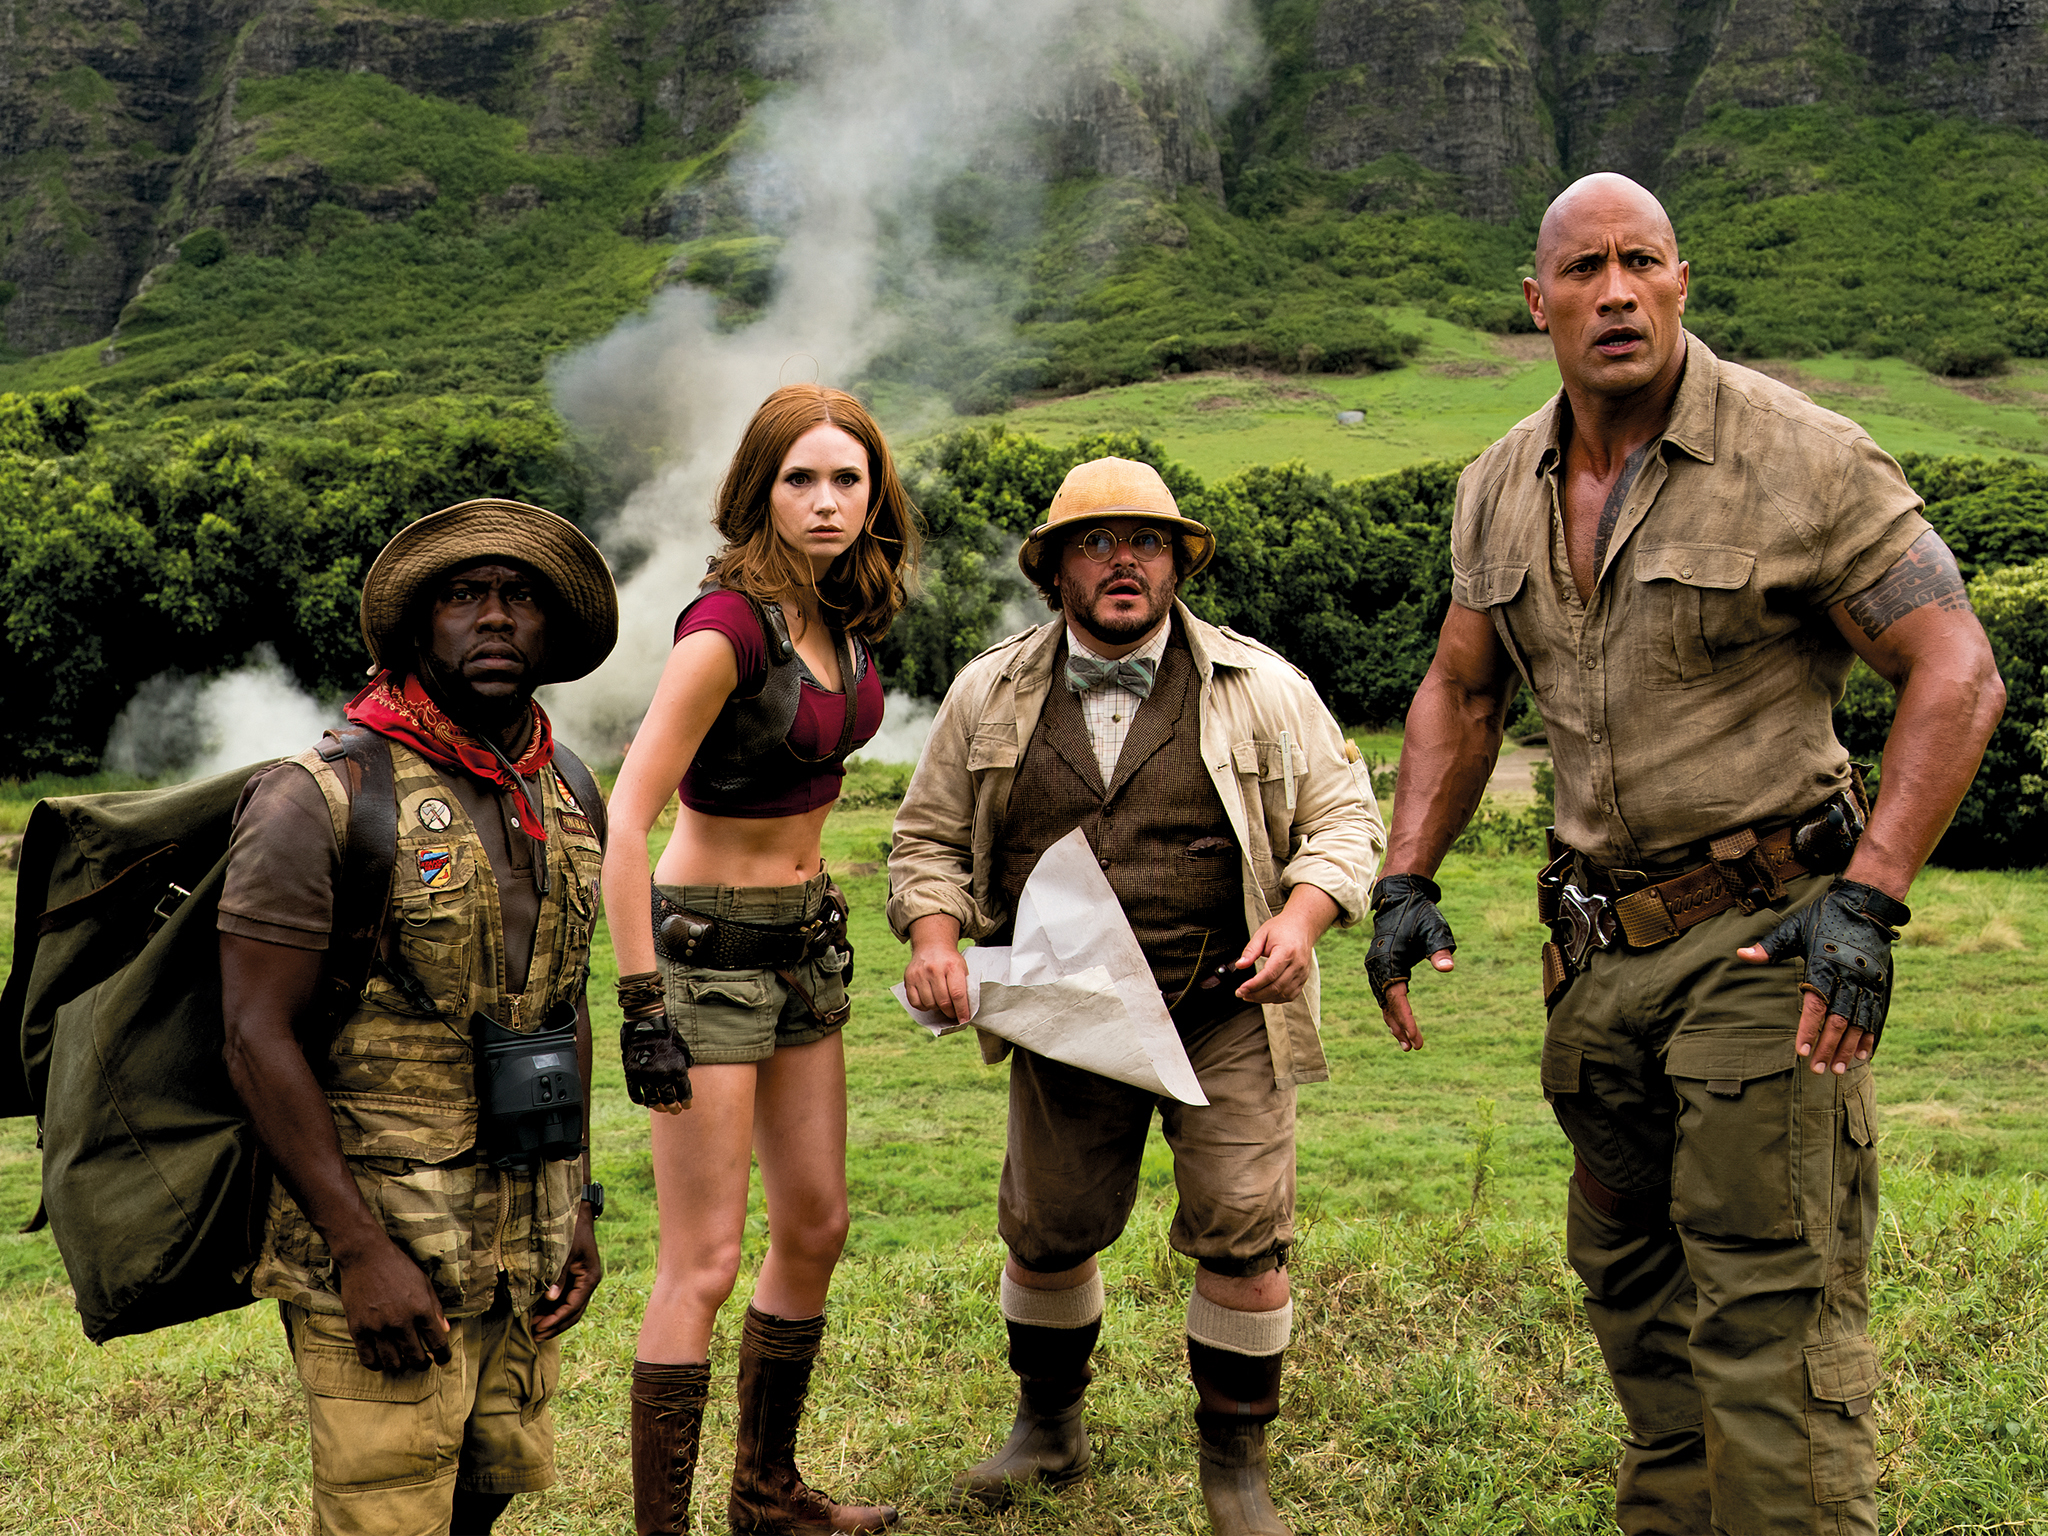 instal the last version for apple Jumanji: Welcome to the Jungle